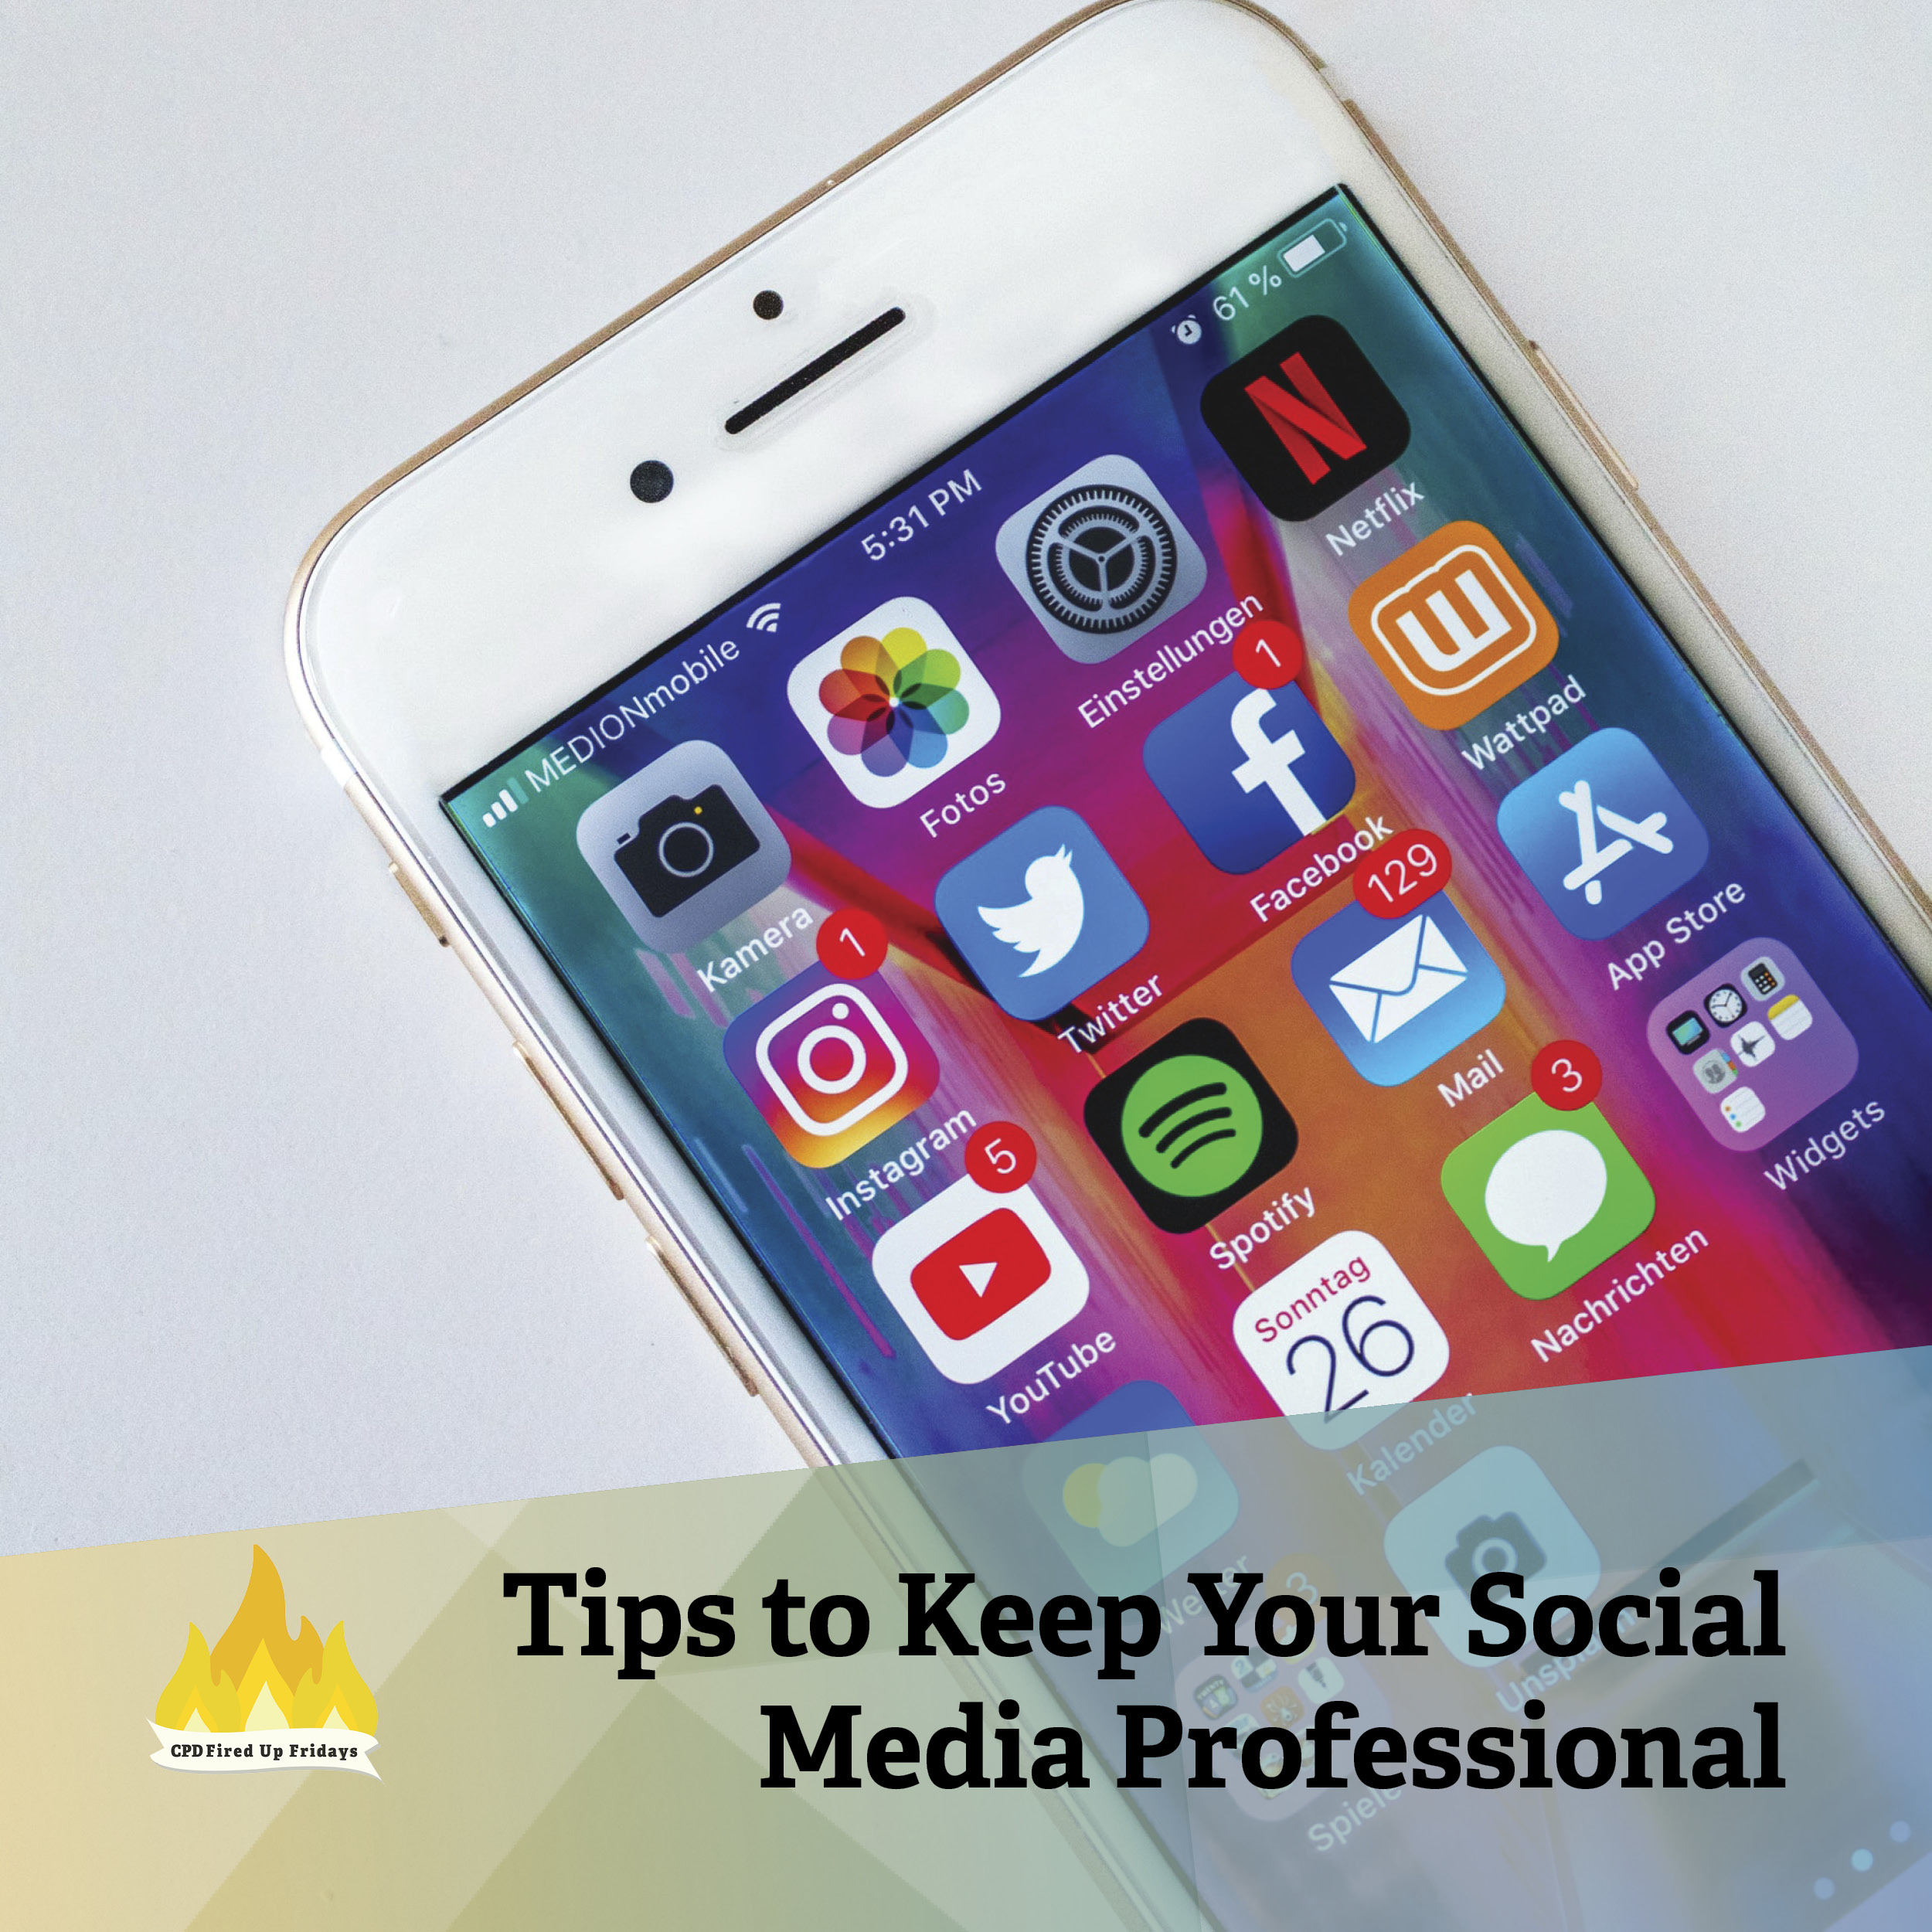 A close up on an iPhone screen, with several icons for platforms like Facebook, Twitter, YouTube, Instagram and more. The text underneath reads: 'Tips to Keep Your Social Media Account Professional.'